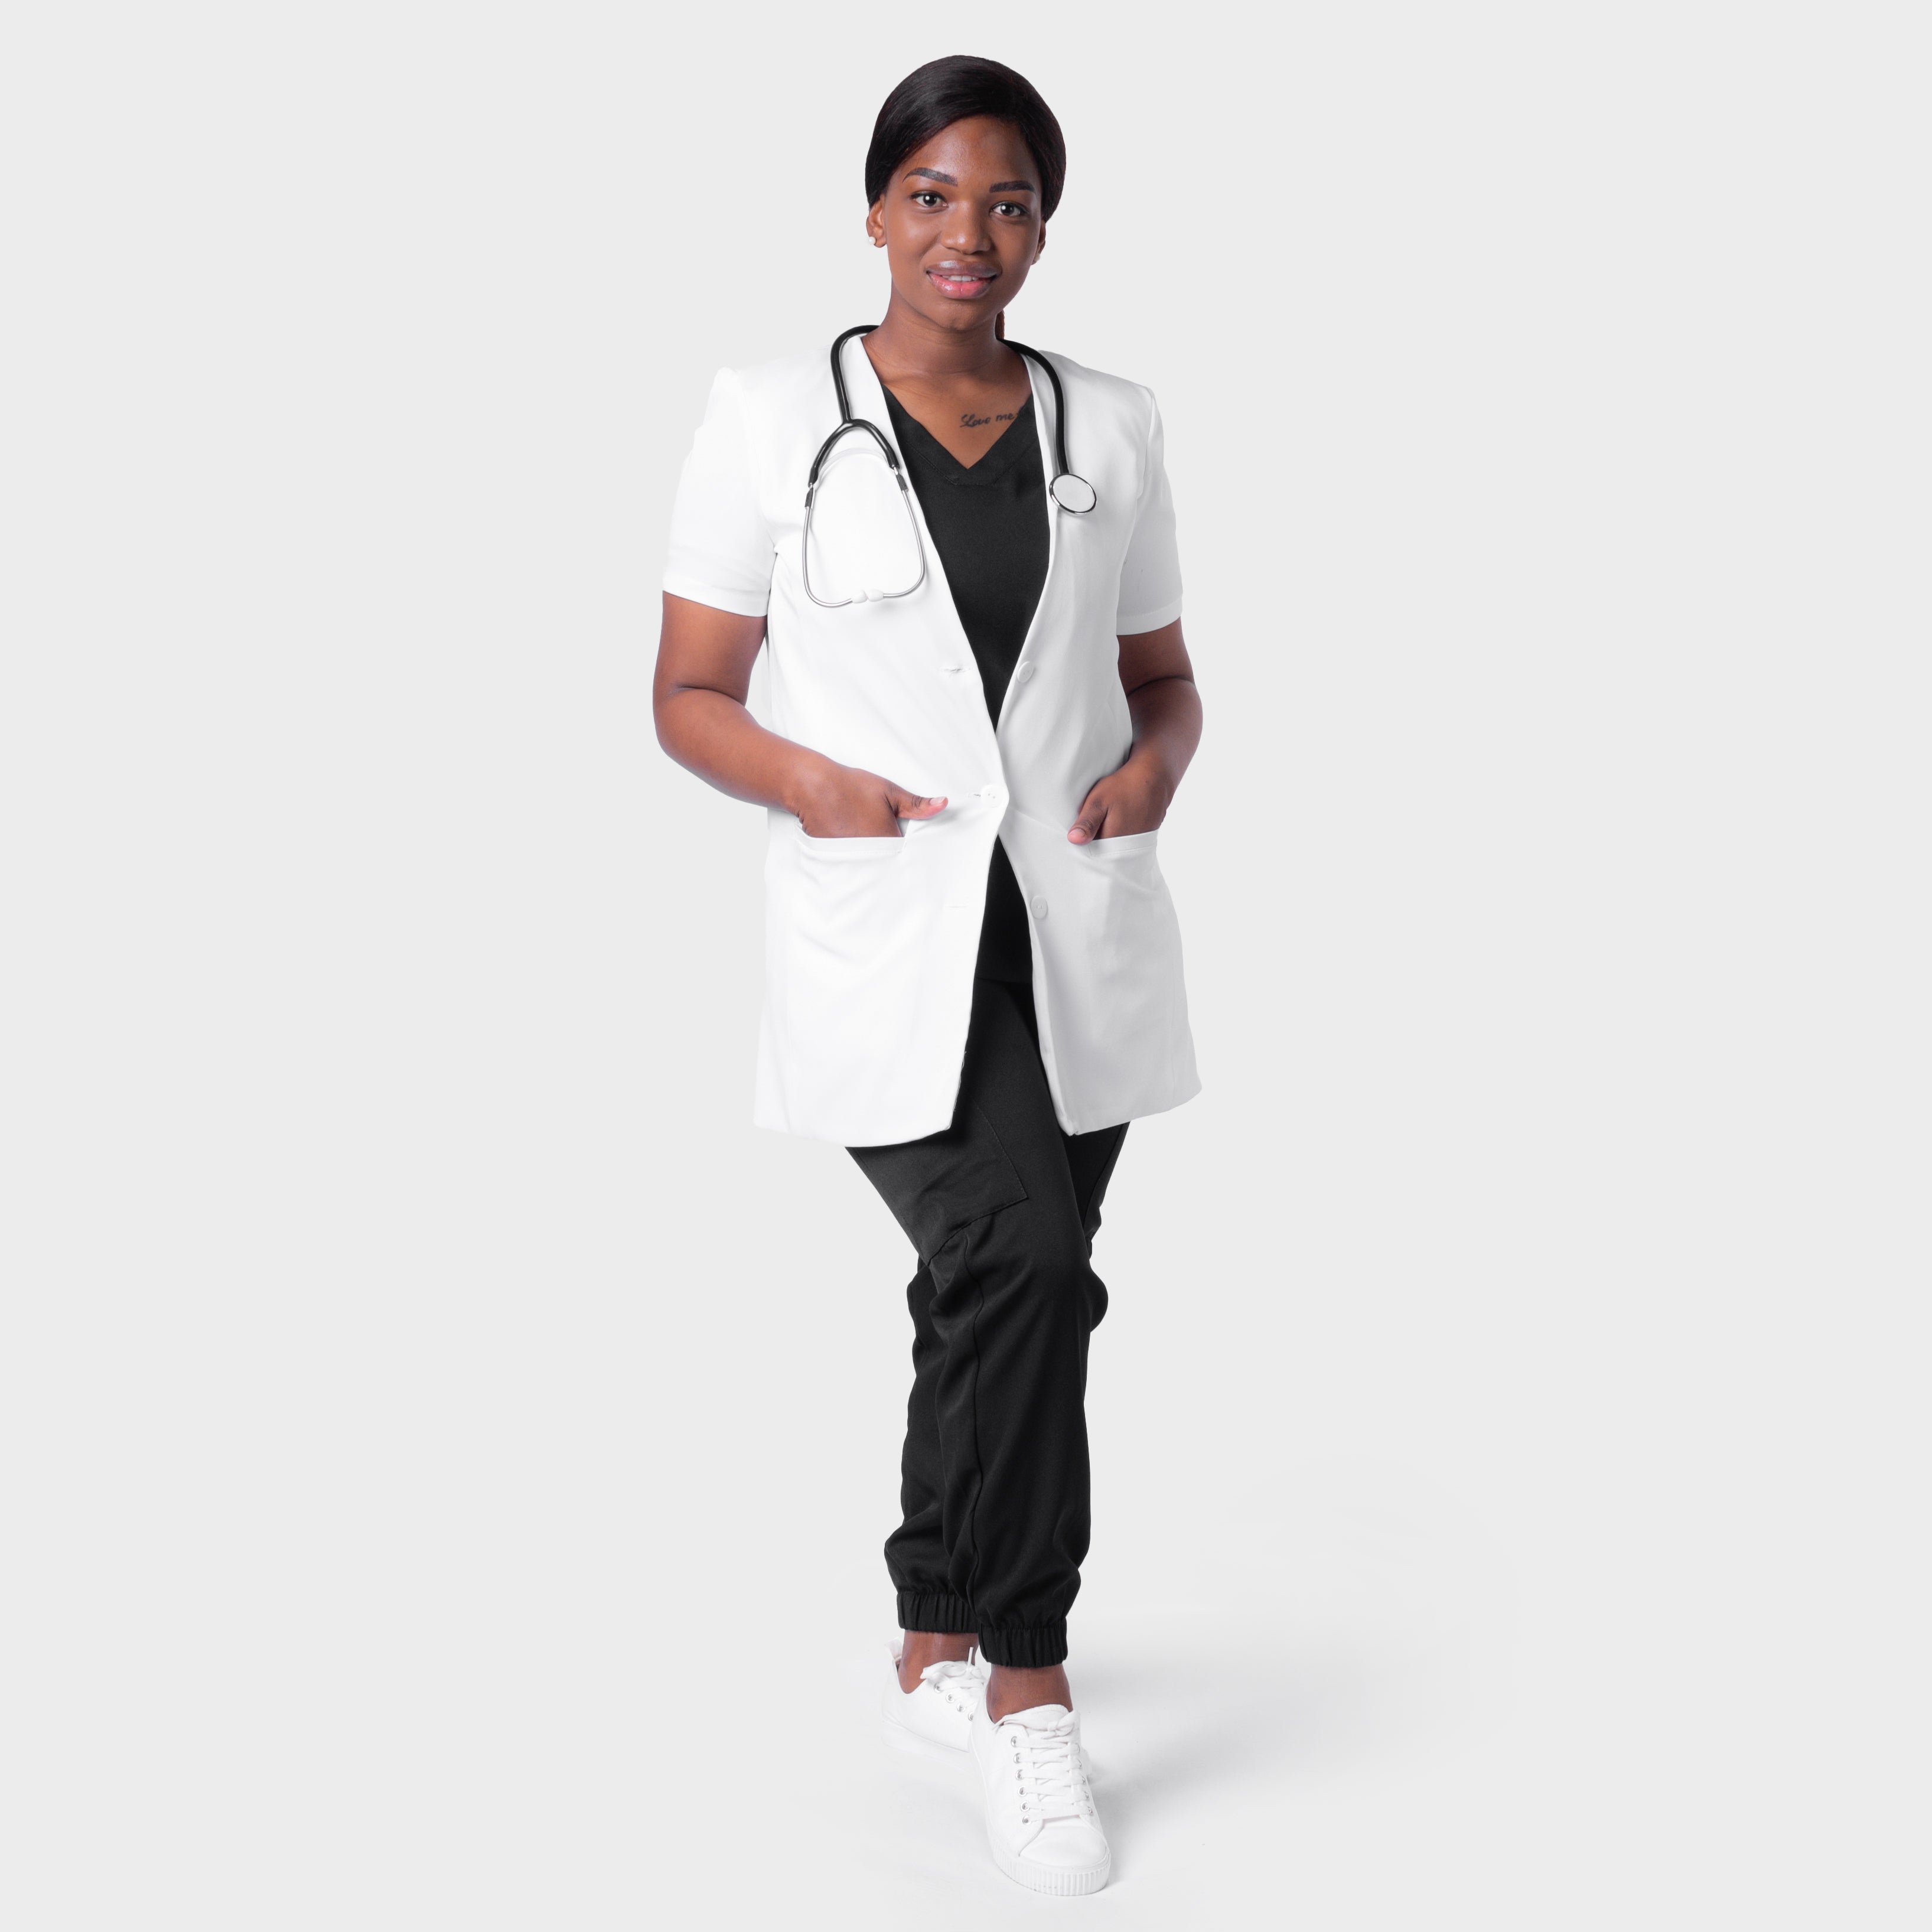 LADIES LUXE LAB COAT - Greens Medi Scrubs South Africa - Premium Medical Uniforms & Apparel - Delivery Across SA 